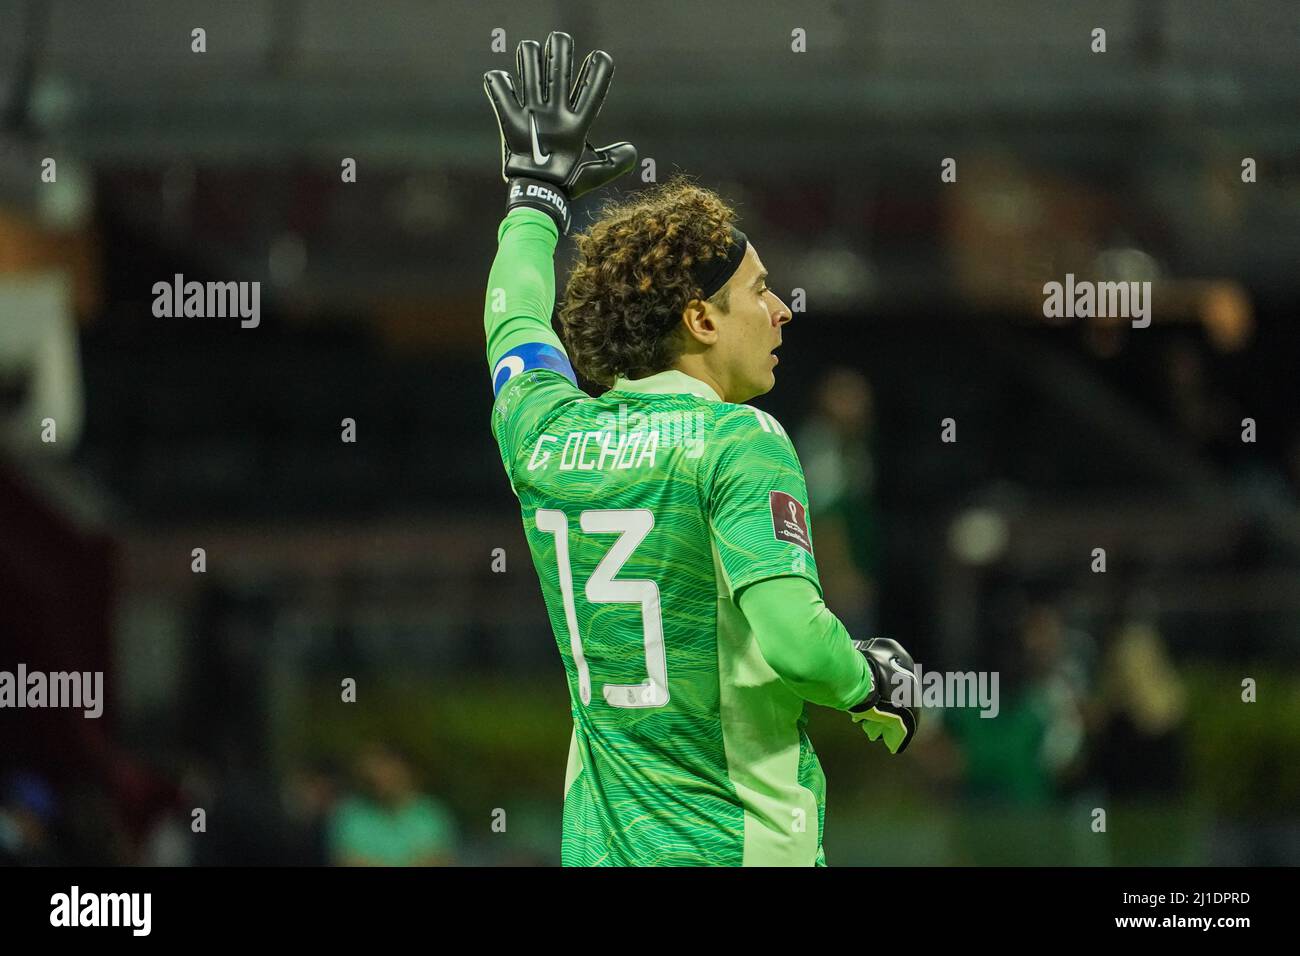 Mexico City, Mexico, March 24, 2022,  Mexico Goalkeeper Francisco Guillermo Ochoa-Magana #13 during the 2022 World Cup Qualifier at Allianz Field.  (Photo Credit:  Marty Jean-Louis) Stock Photo